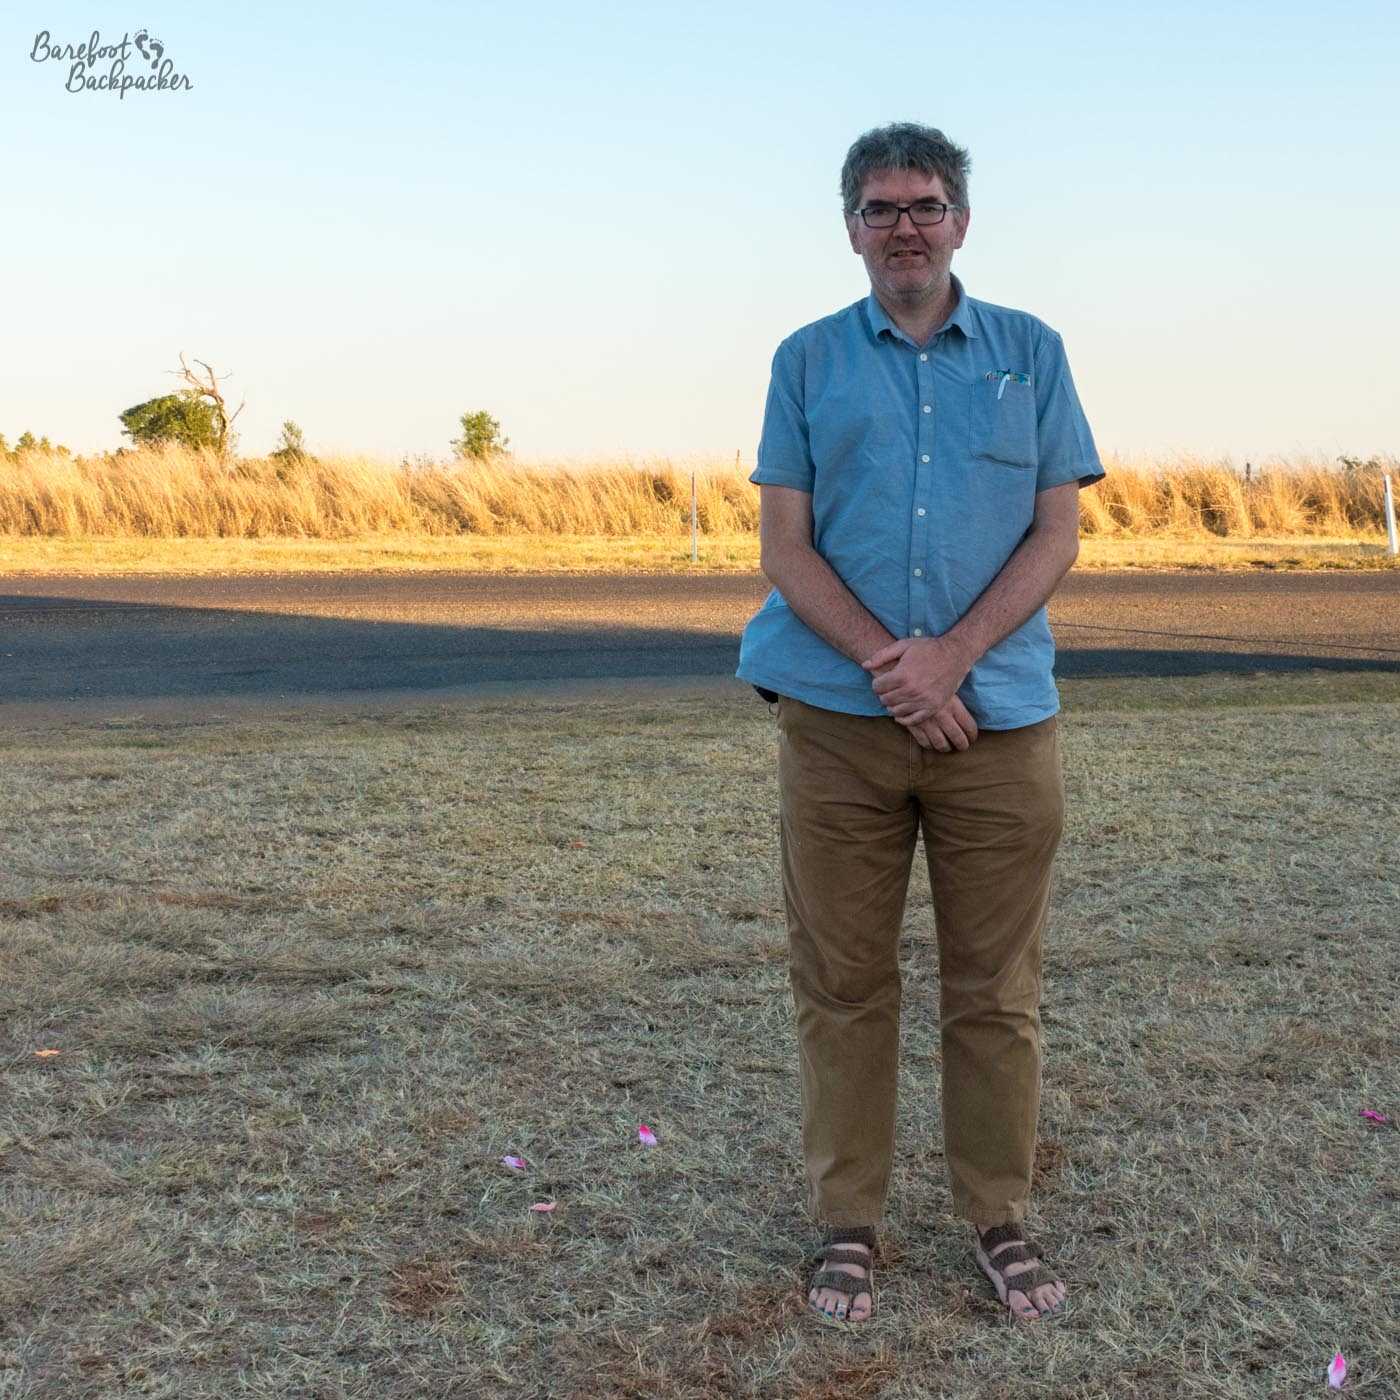 Standing in a field in Queensland, Australia (Henley Brook). The man wears a blue short-sleeved buttoned shirt and light brown trousers, He is wearing the crochet barefoot sandals. The field is scrubland. Behind him is a road bathed in sunshine, and behind that a bright yellow 'hedge' of corn, set against a bright pale blue sky.